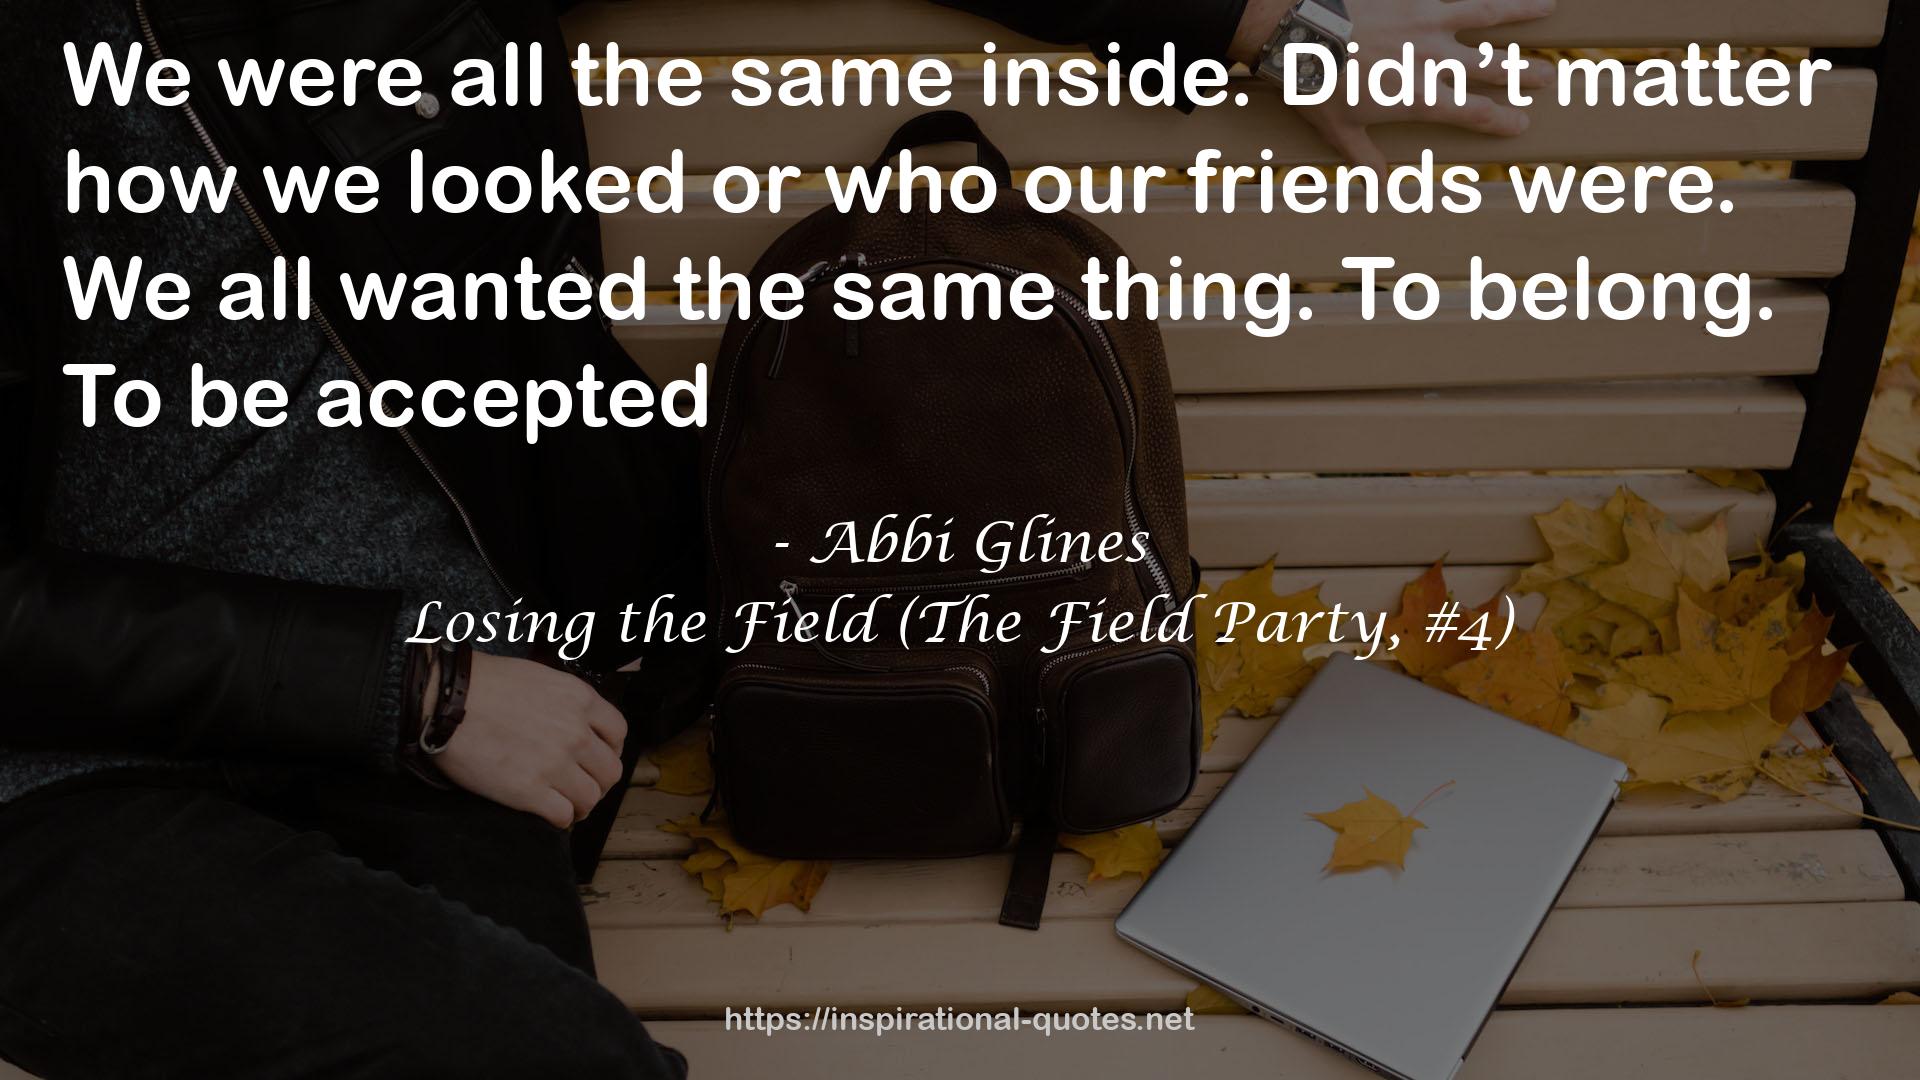 Losing the Field (The Field Party, #4) QUOTES